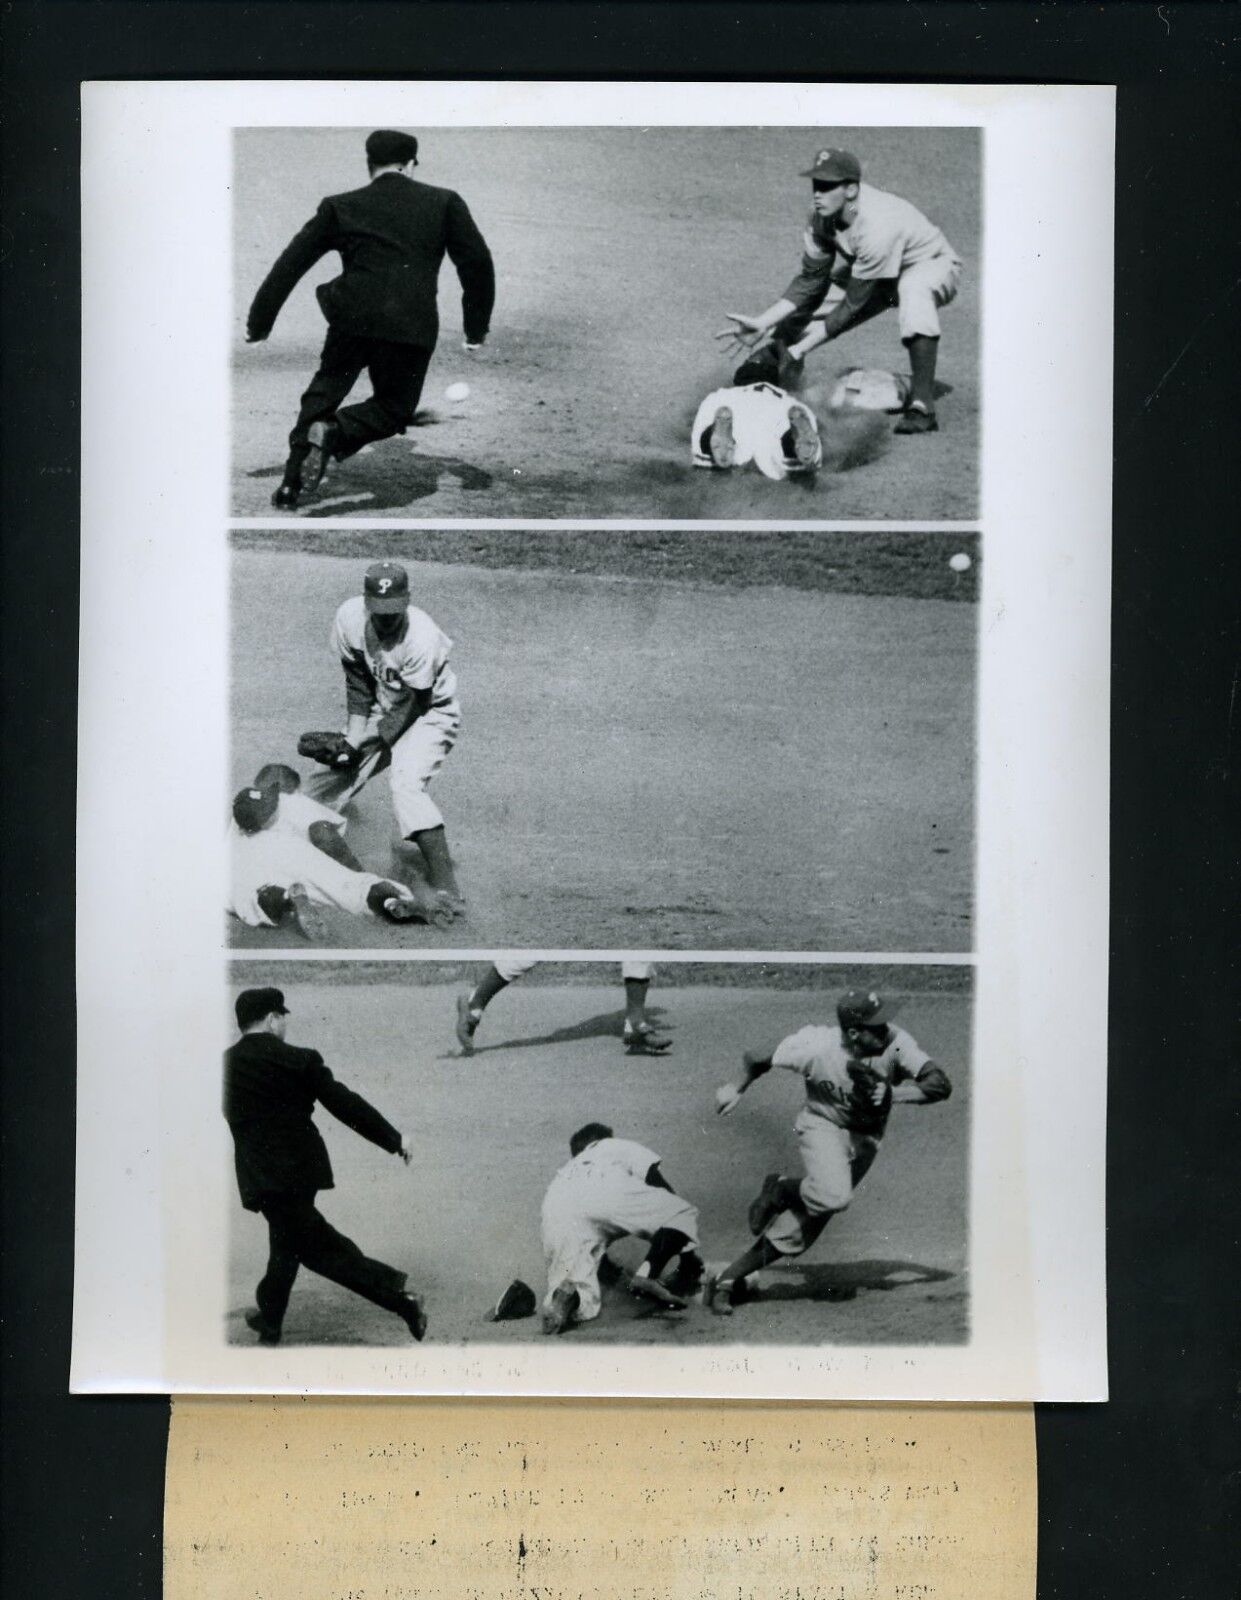 Phil Rizzuto steals second G3 1950 World Series Press Photo Poster painting from Rizzuto estate